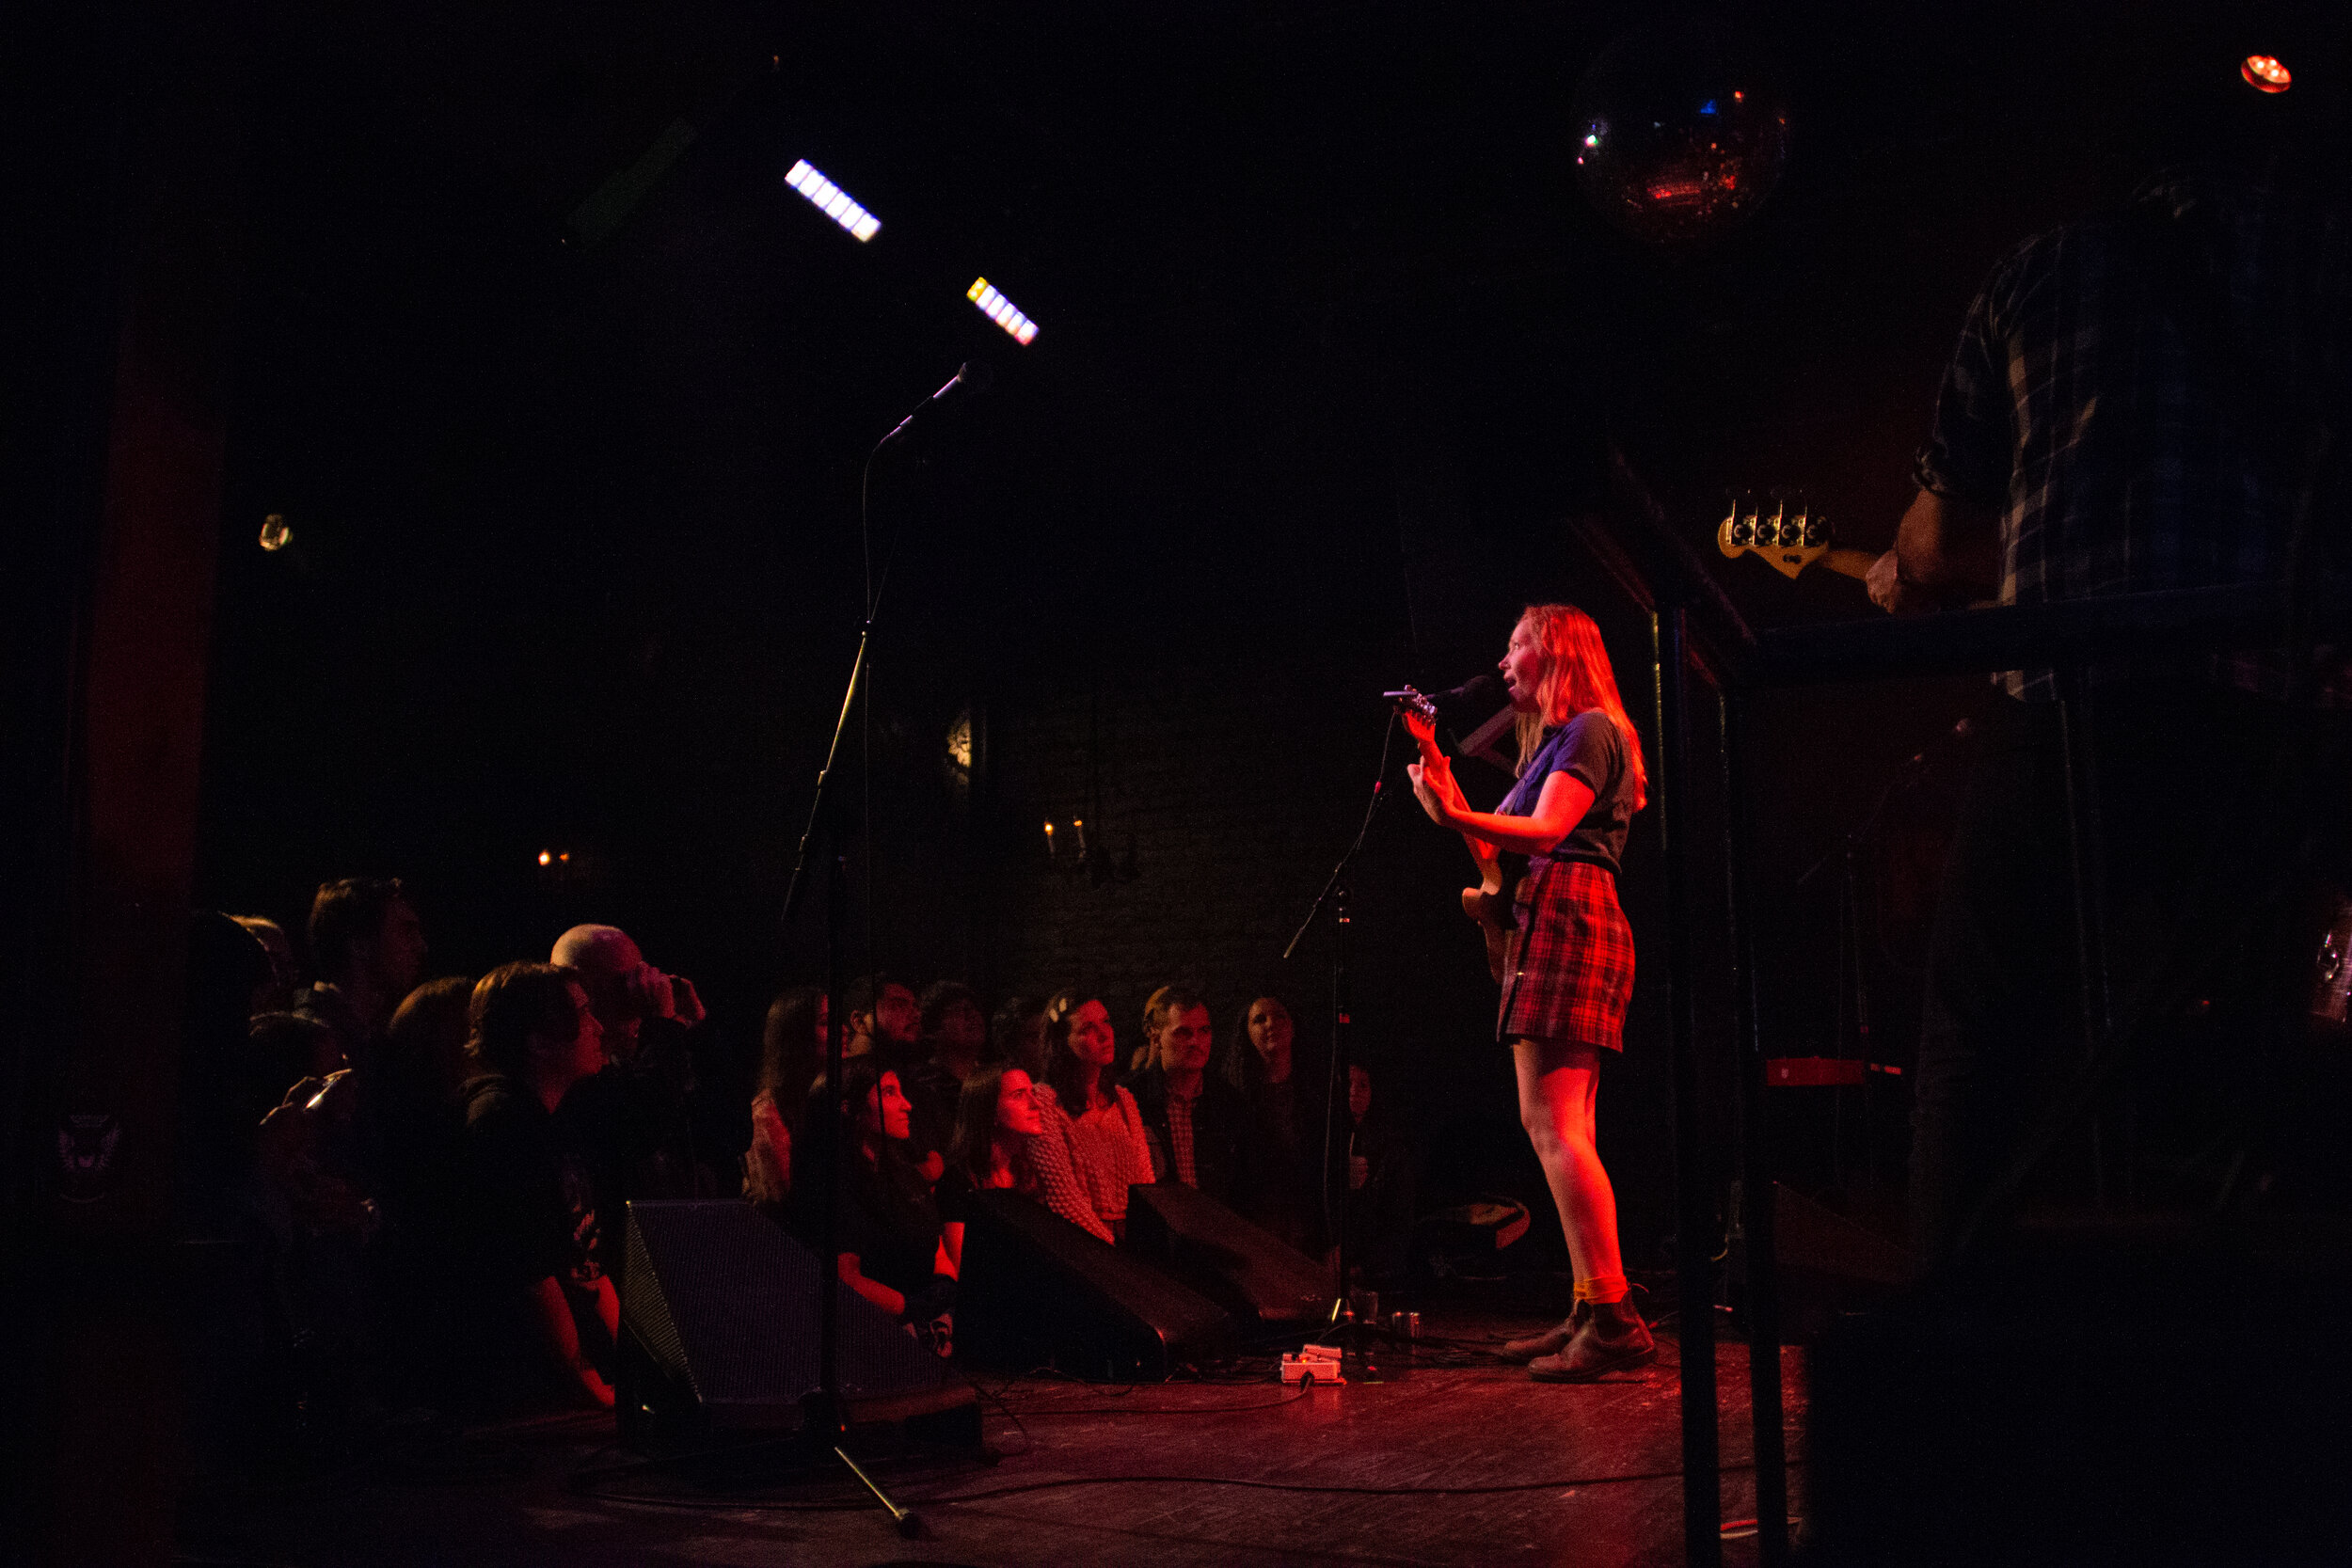  Austrailian singer-songwriter Julia Jacklin performs at the Parish during ACL Late Night on October 12, 2019. Jacklin’s released her second full-length album “Crushing” on February 22, 2019. 